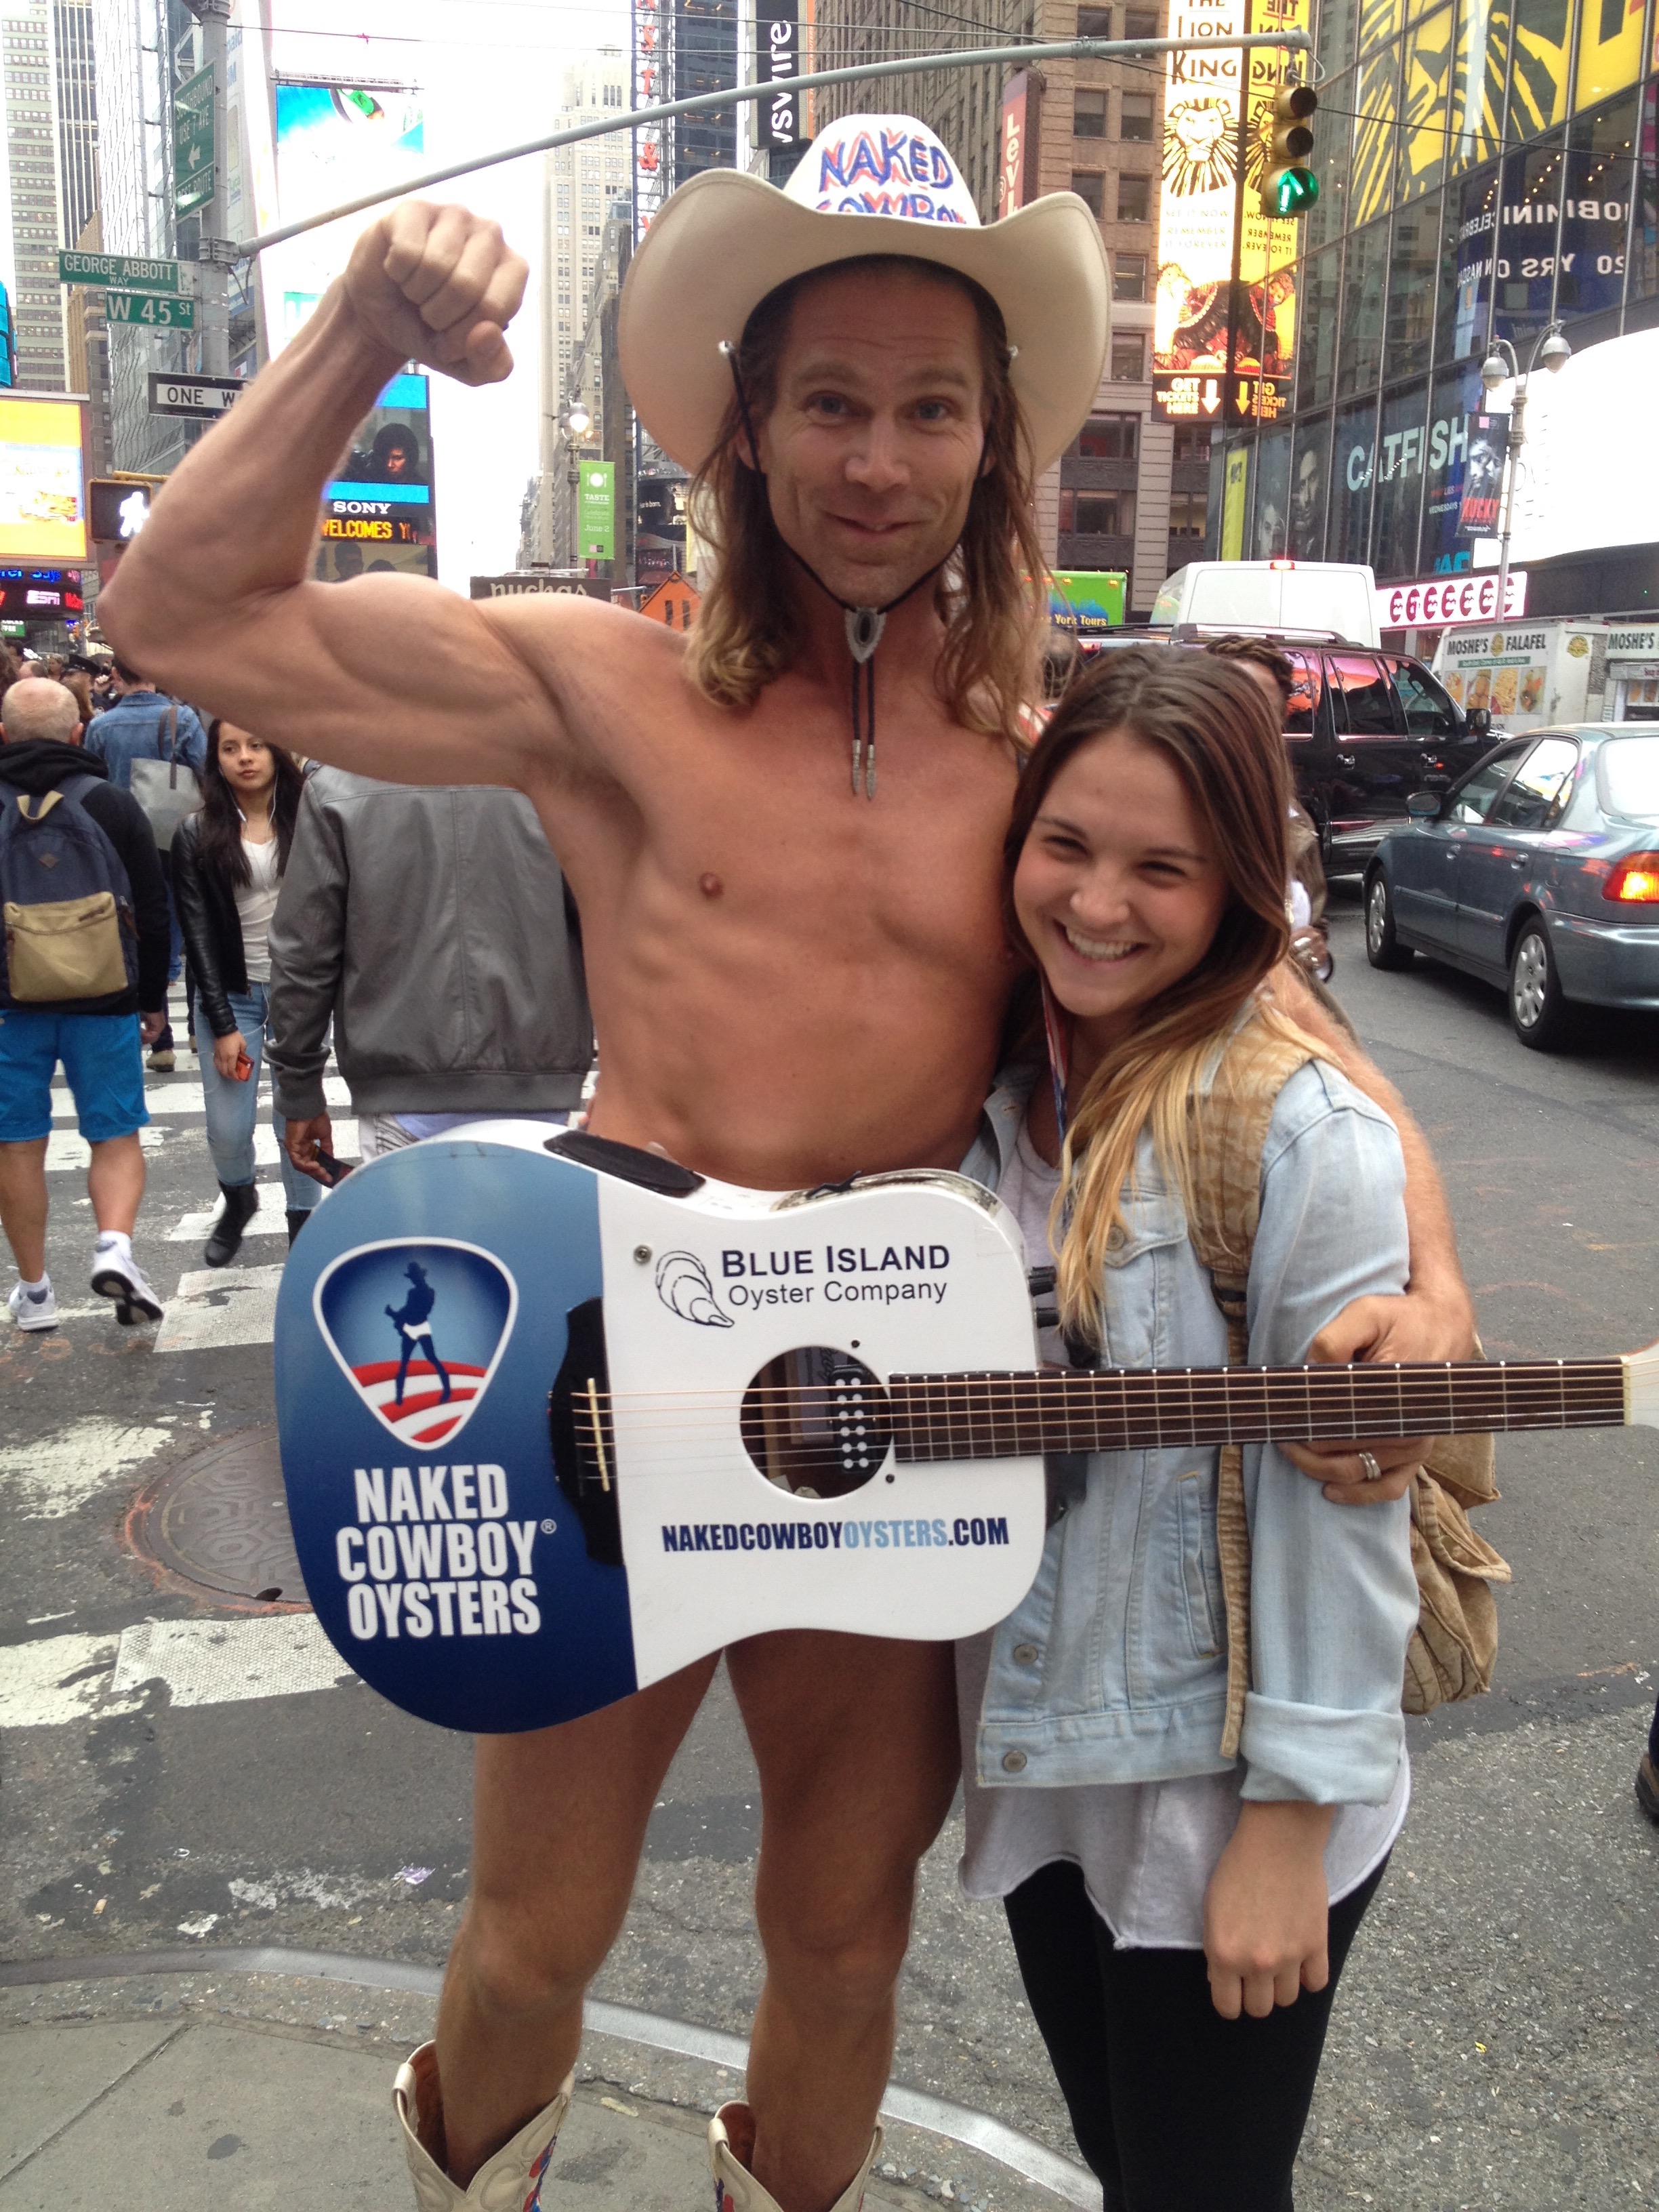 The naked Cowboy 2